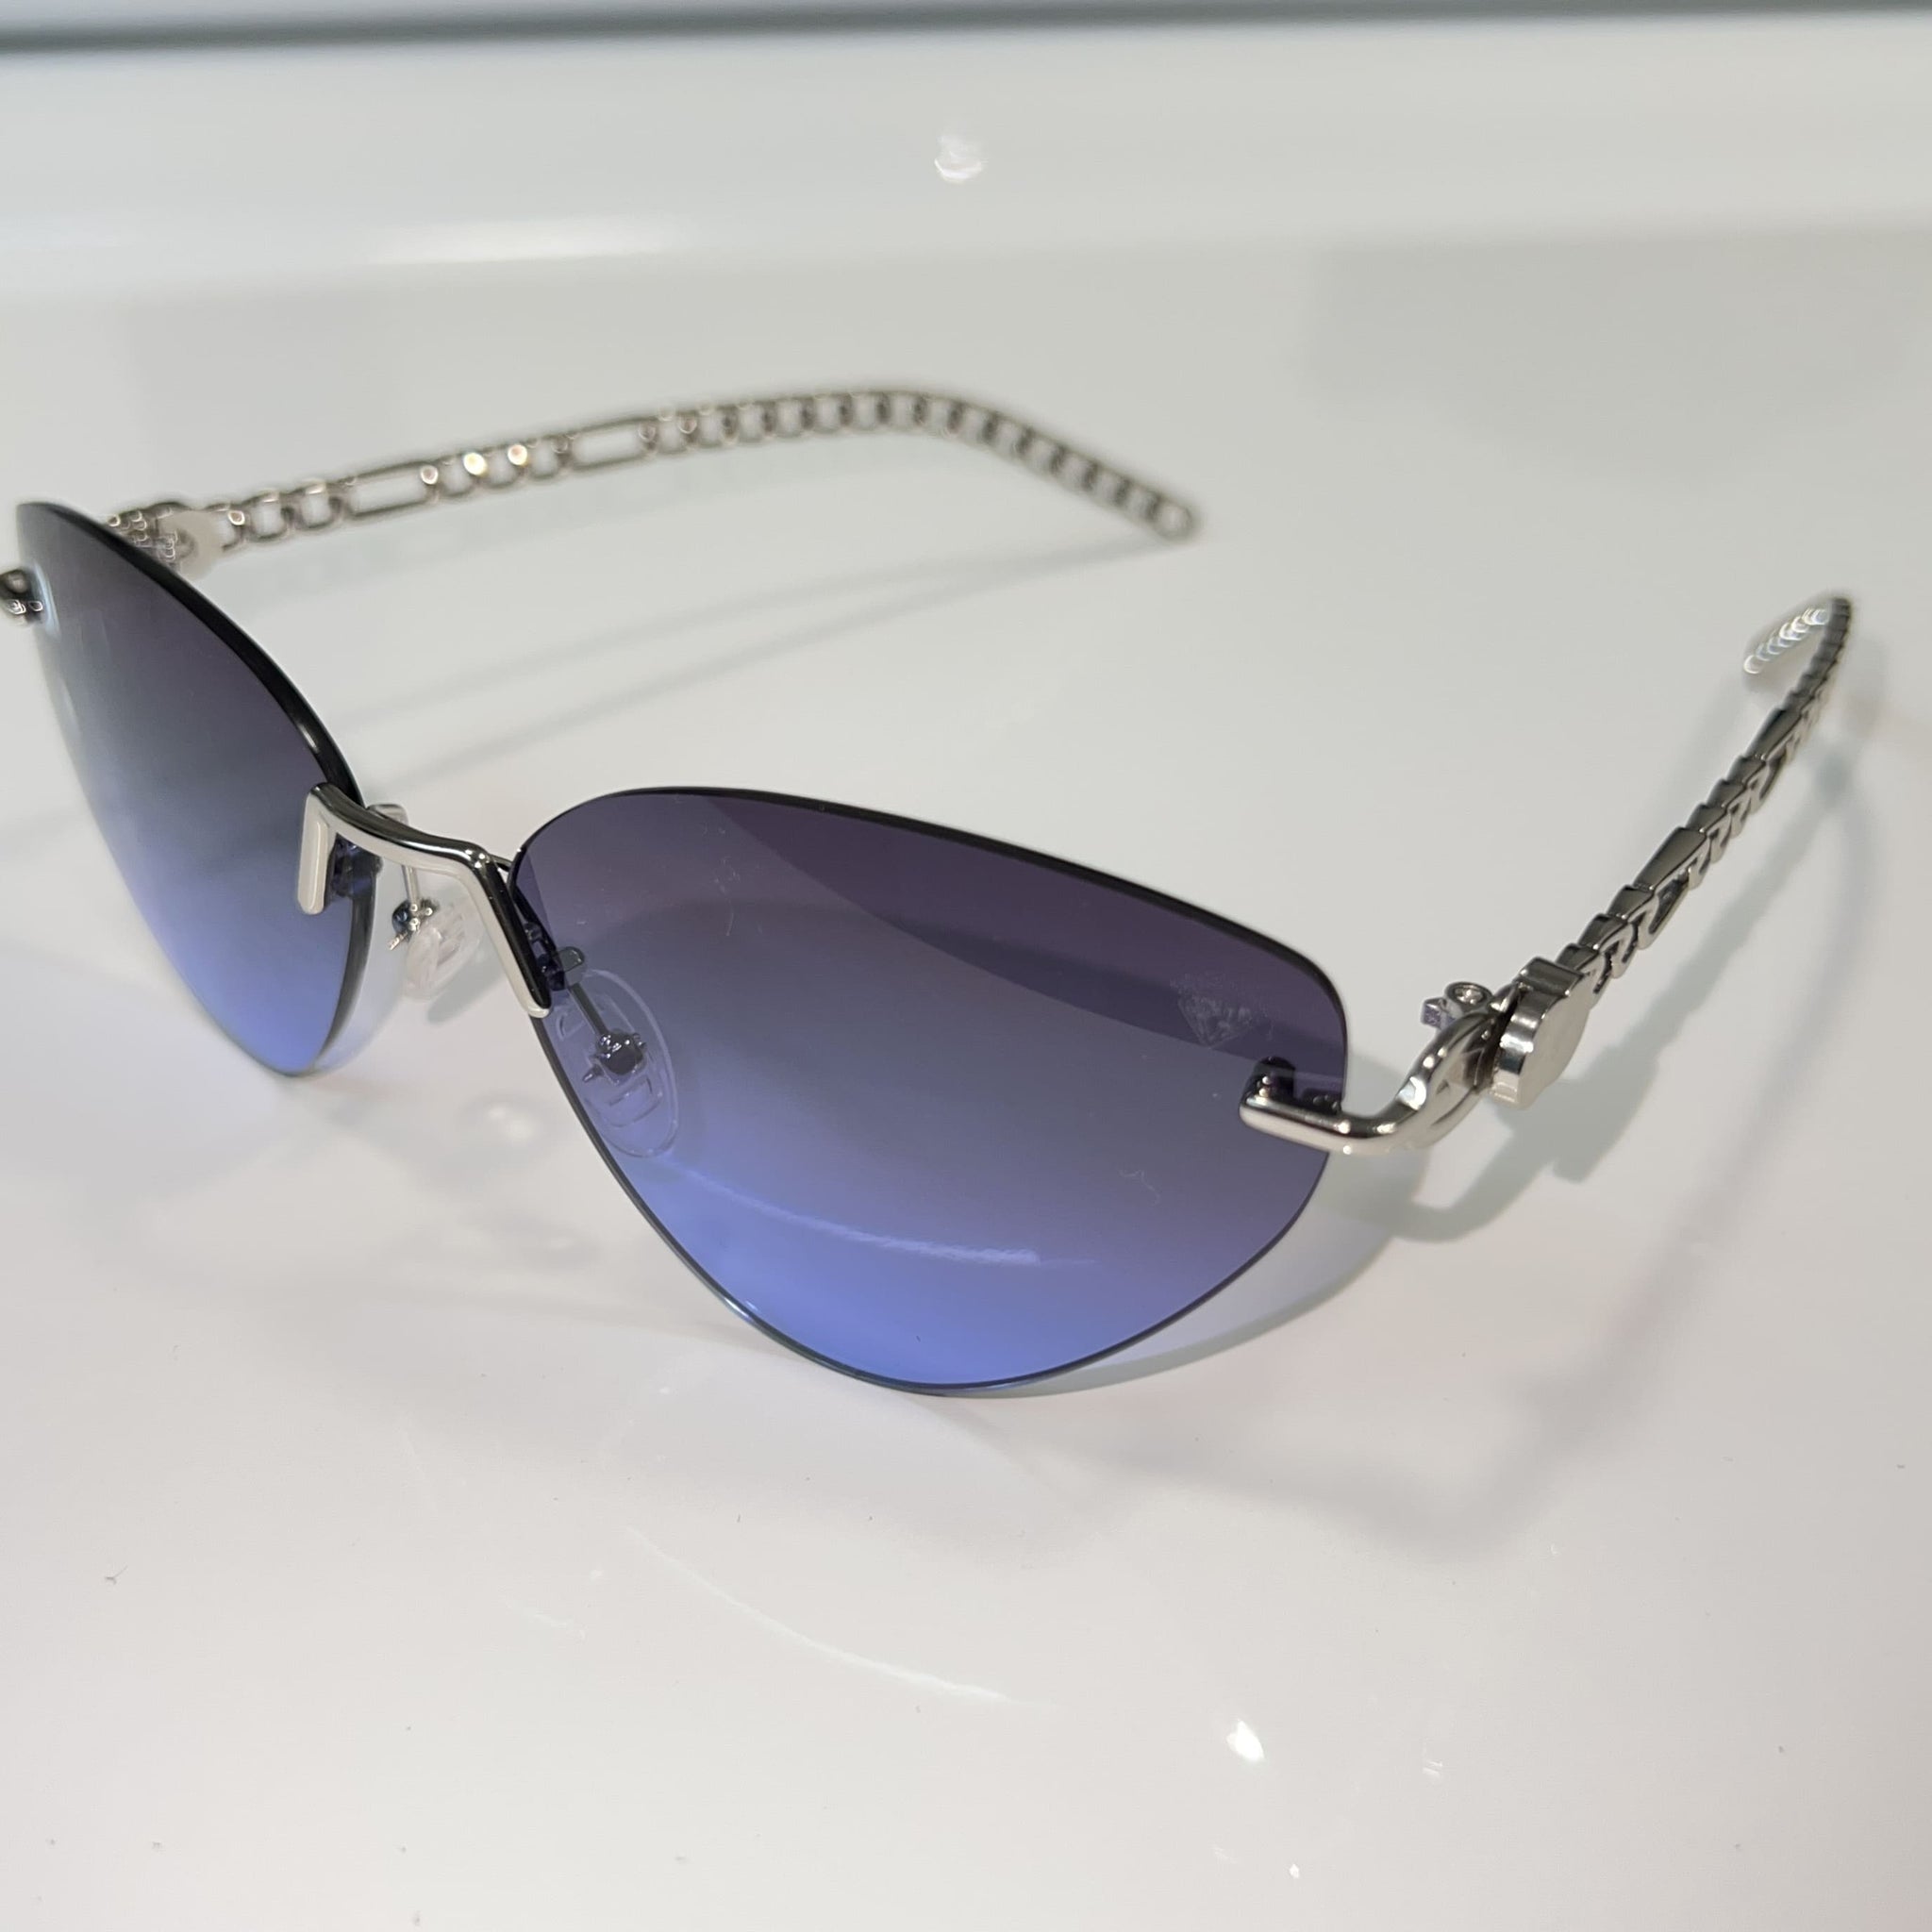 Pearl 'For Her' Glasses - Silver plated - Blue Shade - Sehgal Glasses